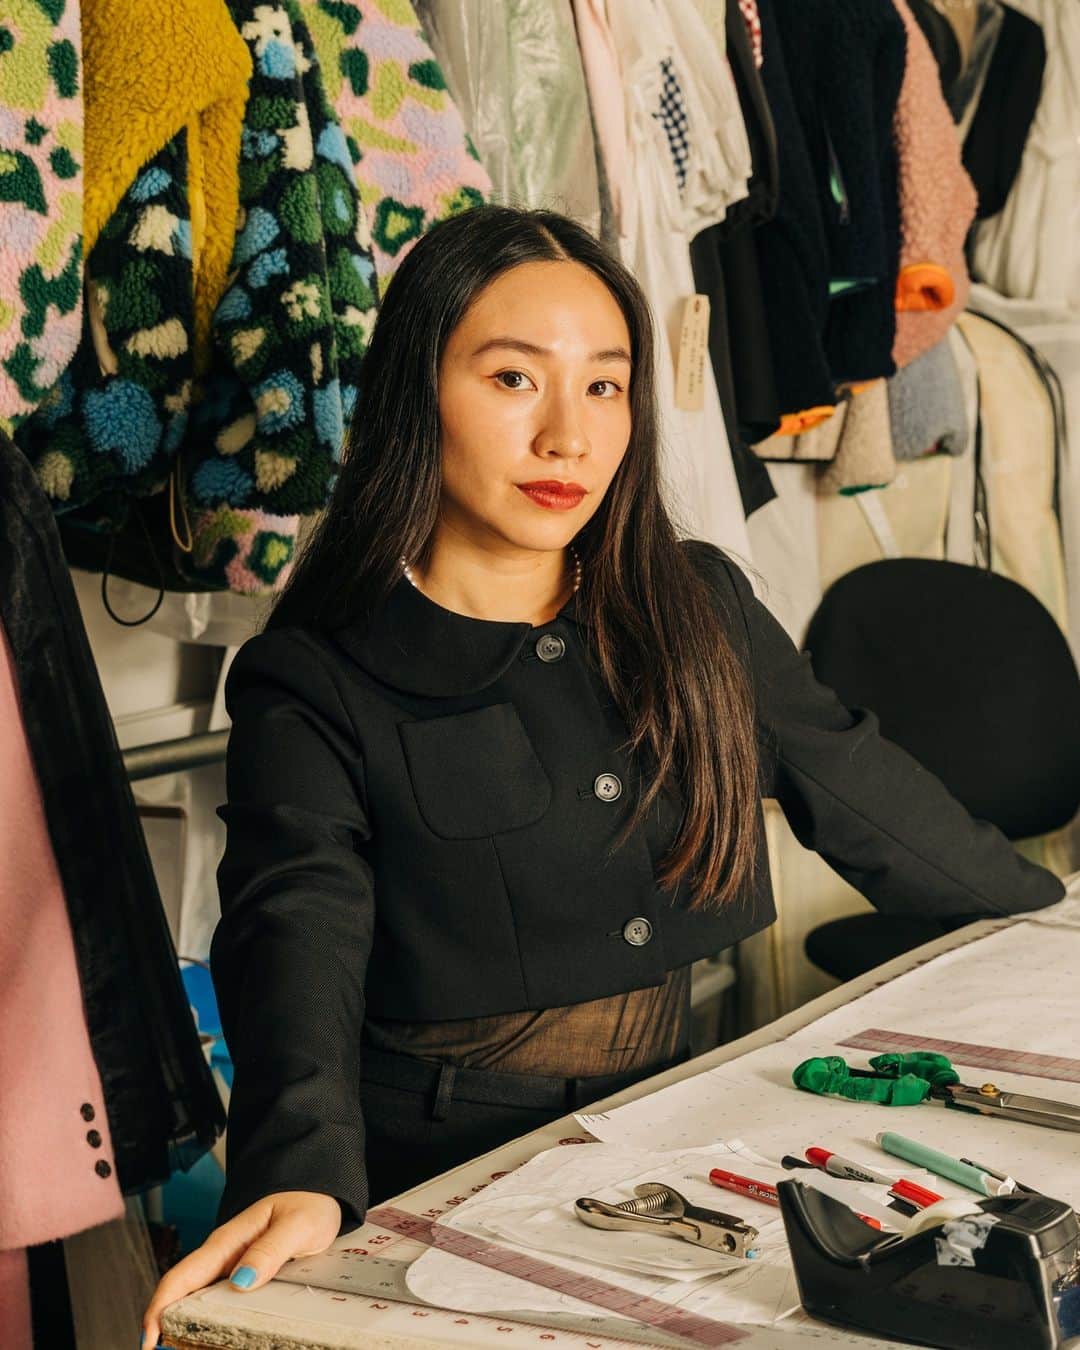 New York Times Fashionのインスタグラム：「The fashion designer Sandy Liang has built a namesake brand known for its buzzy collaborations and twists on nostalgia.  @sandyliang started the brand in 2014, after graduating from Parsons School of Design. Many of the brand’s most beloved pieces were inspired by Liang’s childhood wardrobe. In 2019, a playful, bold fleece became something of a holy grail among fashion insiders. In 2022, when Liang introduced her line’s first shoe, a Mary Jane flat with a pointe toe that conjures after-school ballet lessons, the initial inventory of about 800 pairs sold out in two days.   Her collaboration with @baggu, which was released this week, quickly sold out, too. Before the collaboration dropped, dozens of people shared DIY versions of a nylon shoulder bag with thin bows on its sides on TikTok. Bows, Liang said, were a part of “this whole childhood emblem thing,” along with other symbols — hearts, stars and flowers — that have become motifs in her designs.  The childhood nostalgia underlying Liang’s work can also bum her out. “I’m obsessed over something that I can actually never return to,” she said.  Tap the link in our bio to read more from @jtes about Sandy Liang. Photo by @jeenahmoon」